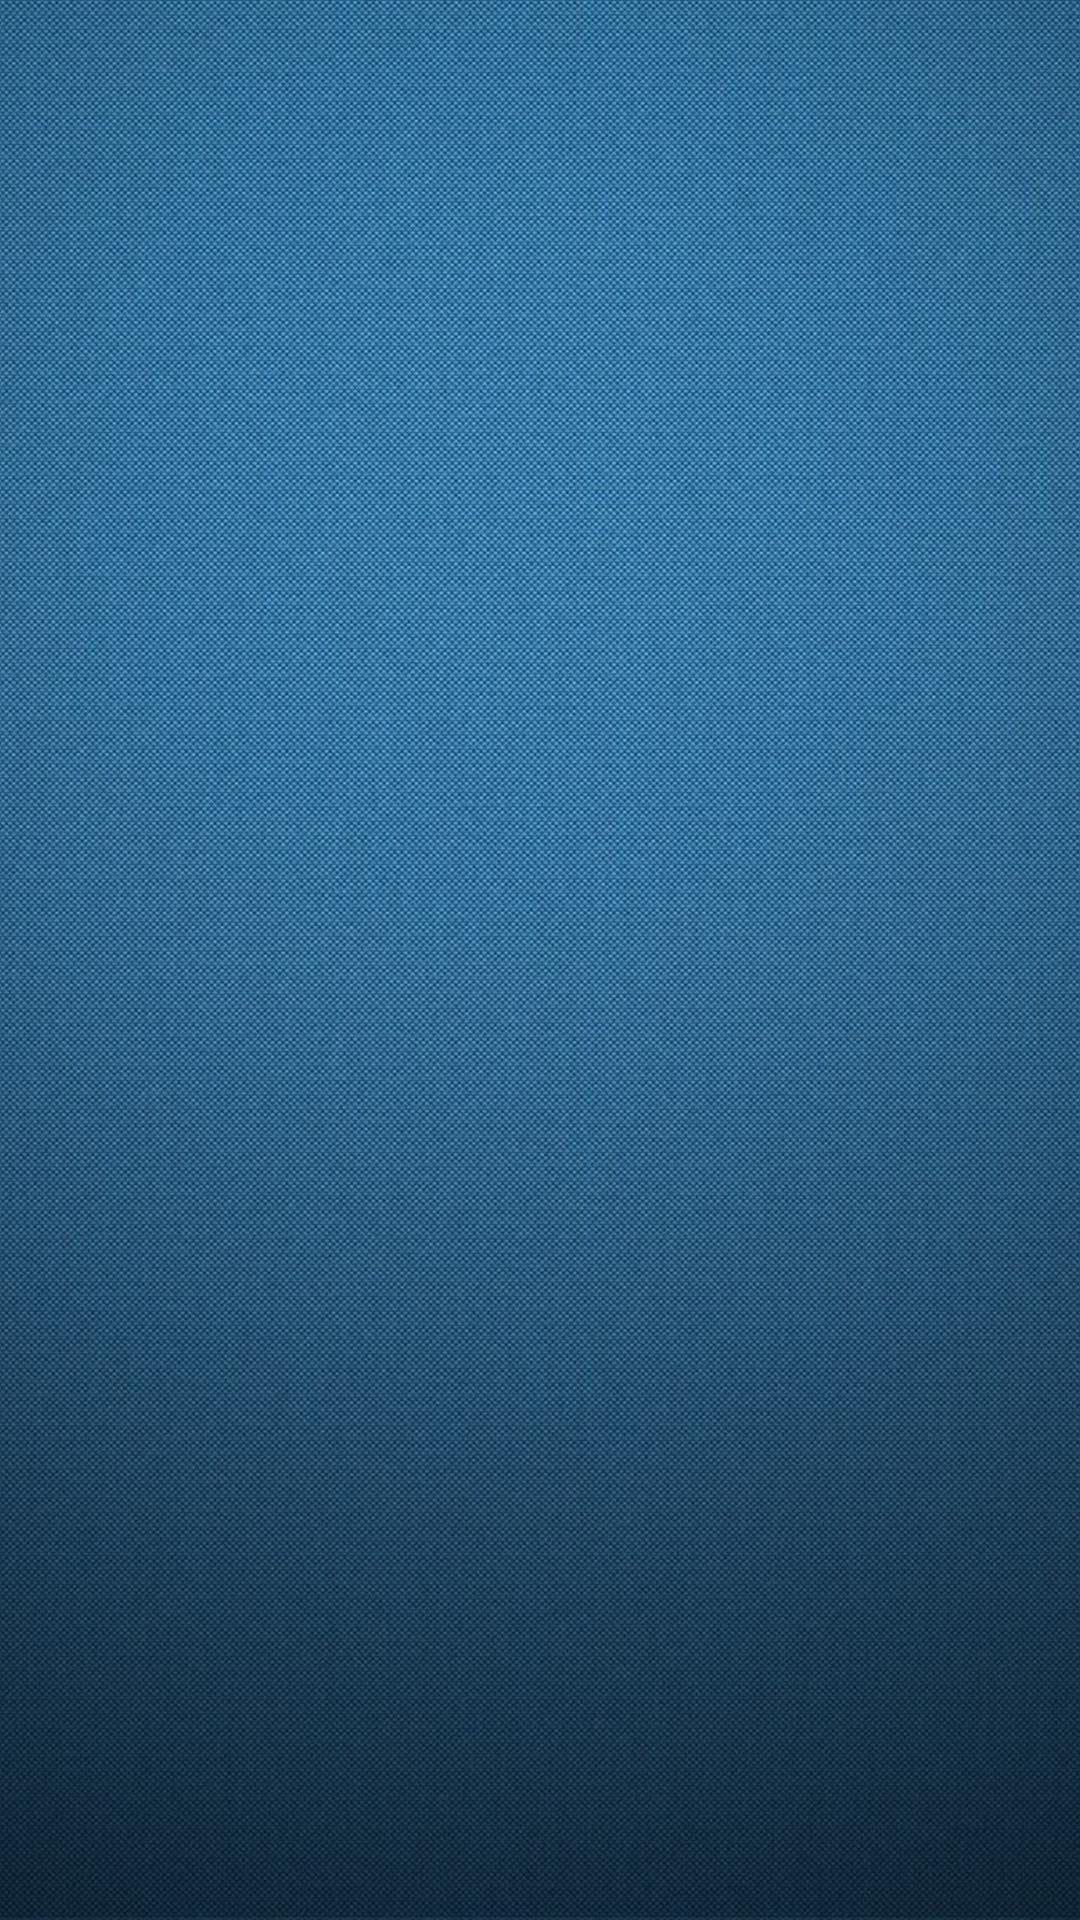 Plus HD Texture Solid Surface iPhone Wallpaper